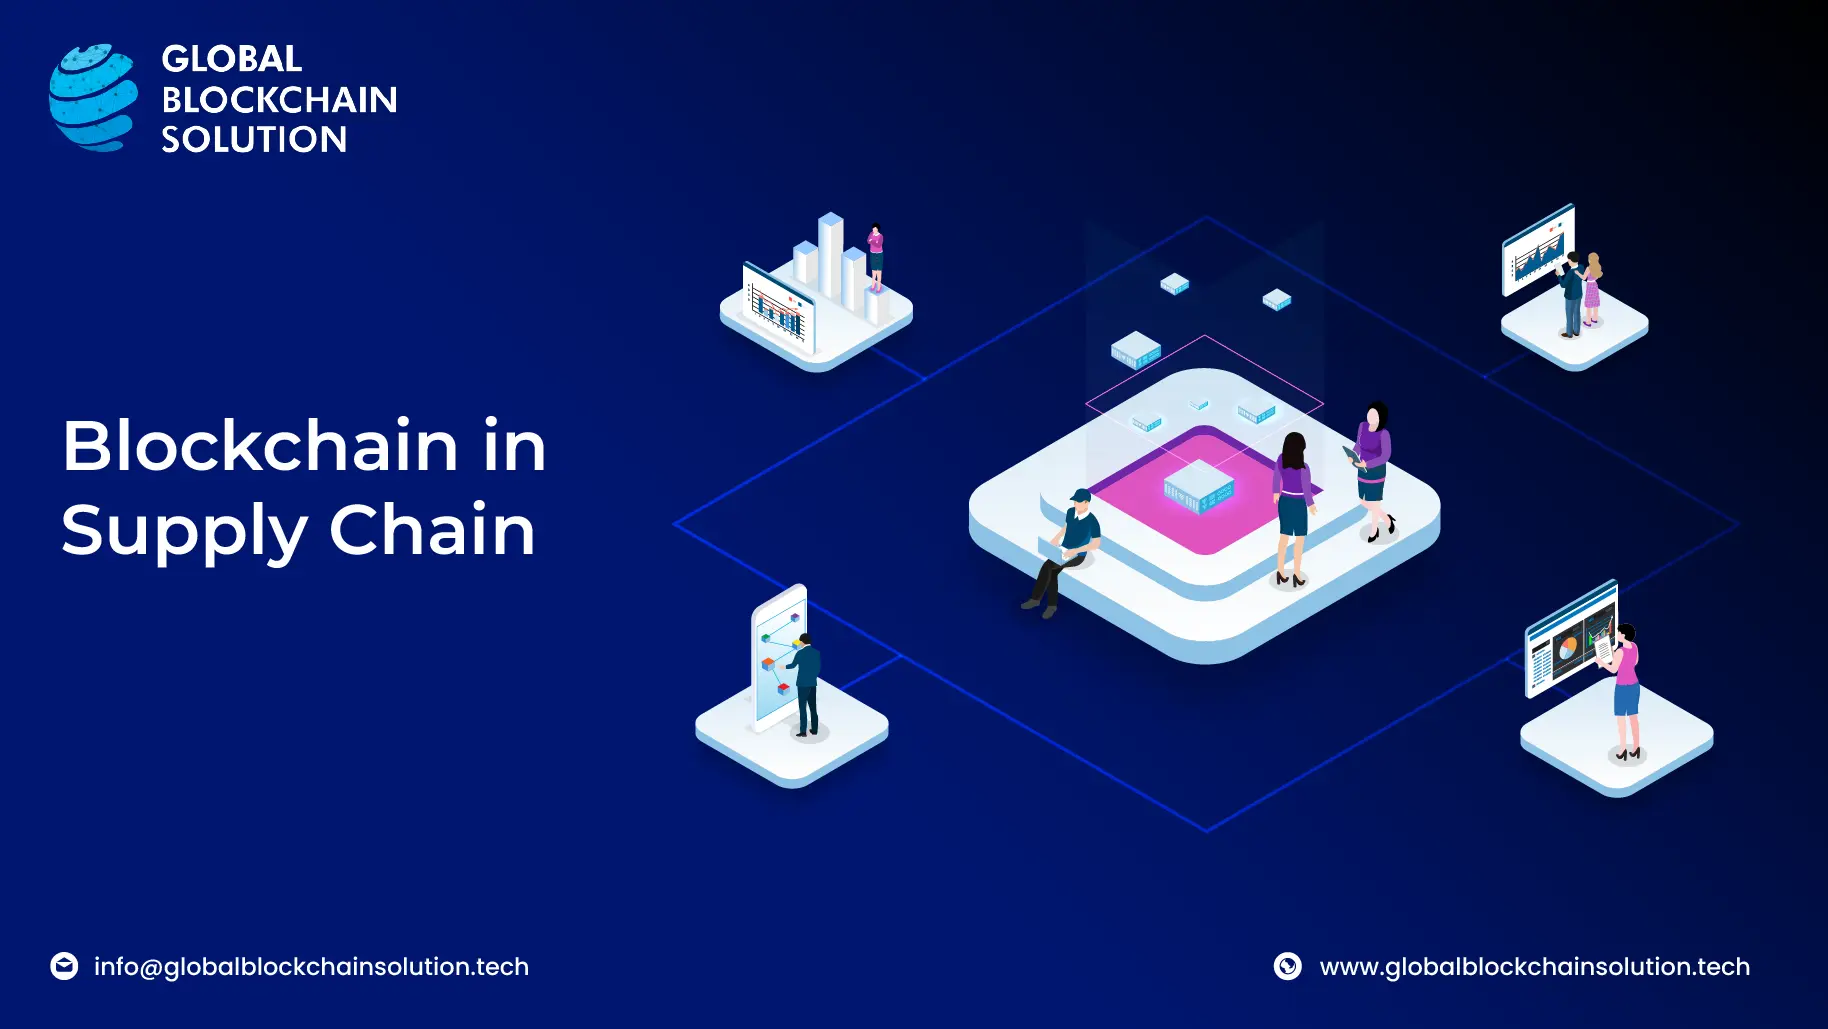 Benefits and Limitations of blockchain in supply chain